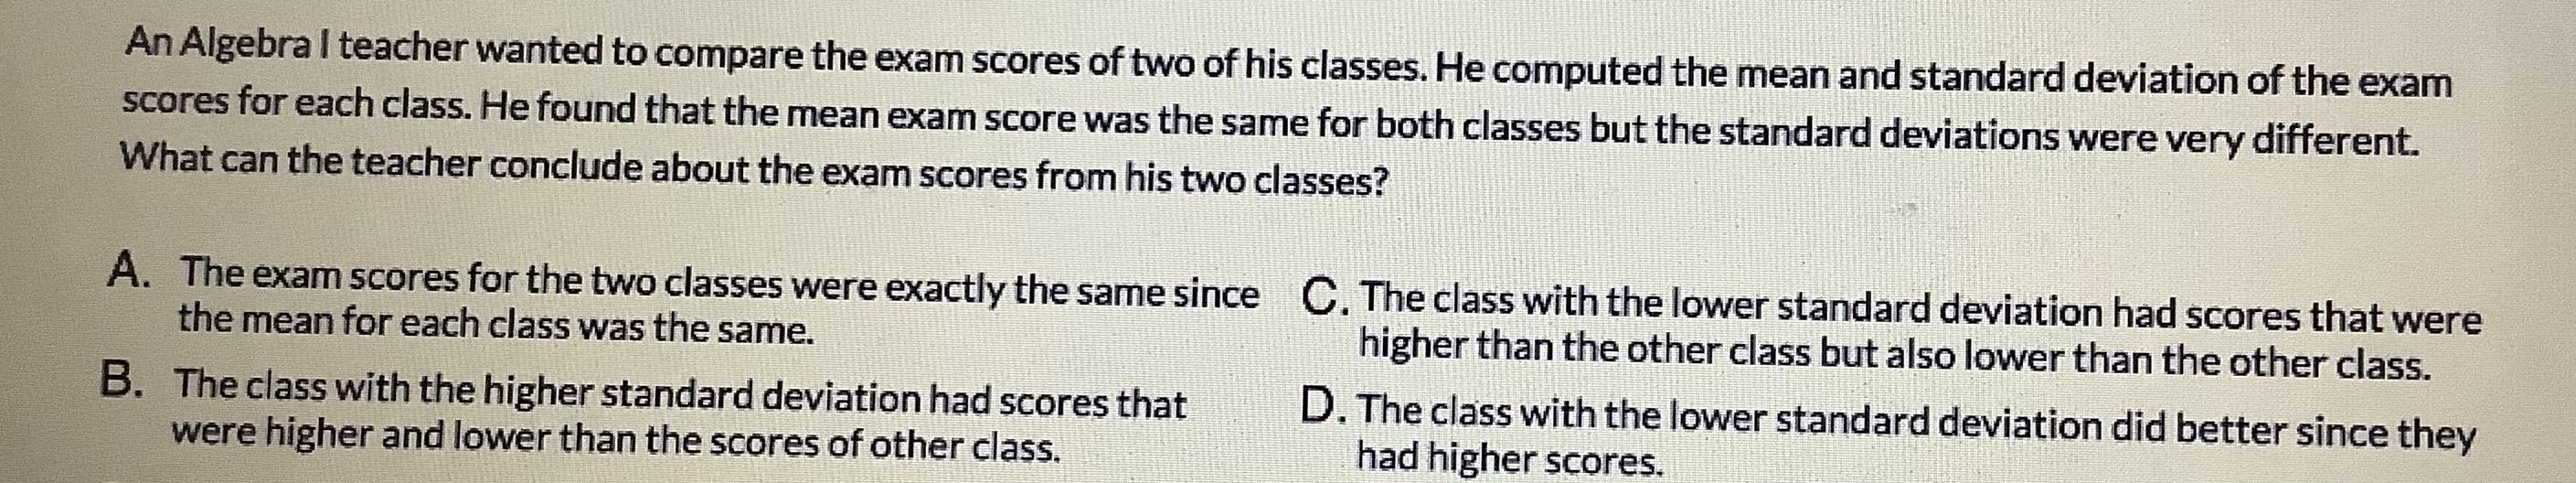 Please Help! Provide An Answer With An Explanation To My Question &amp; You Will Receive A 100 Points